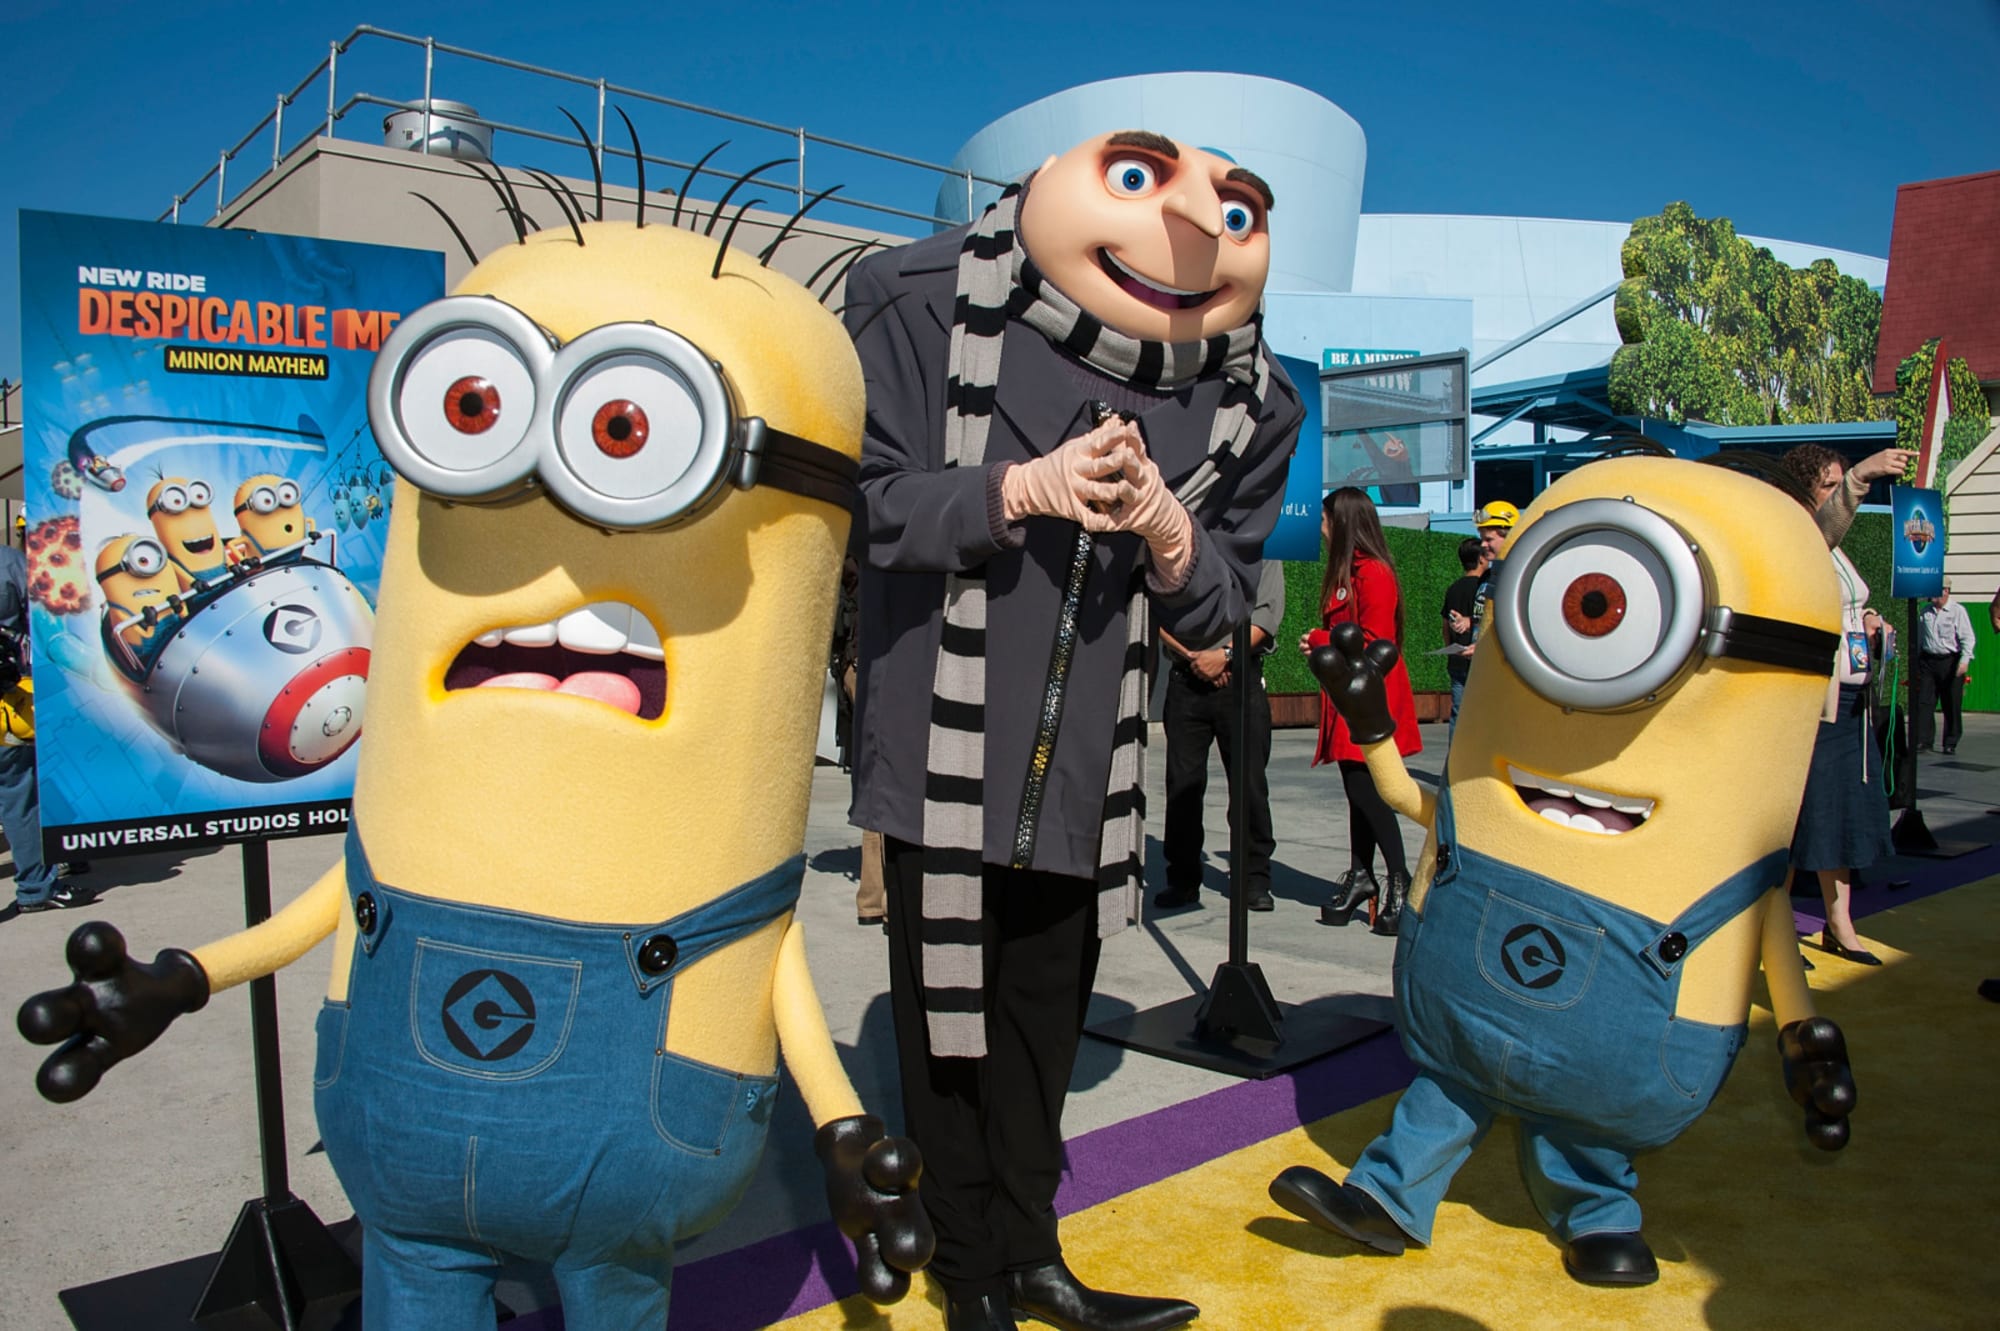 Despicable Me is coming to Netflix tonight for all to enjoy